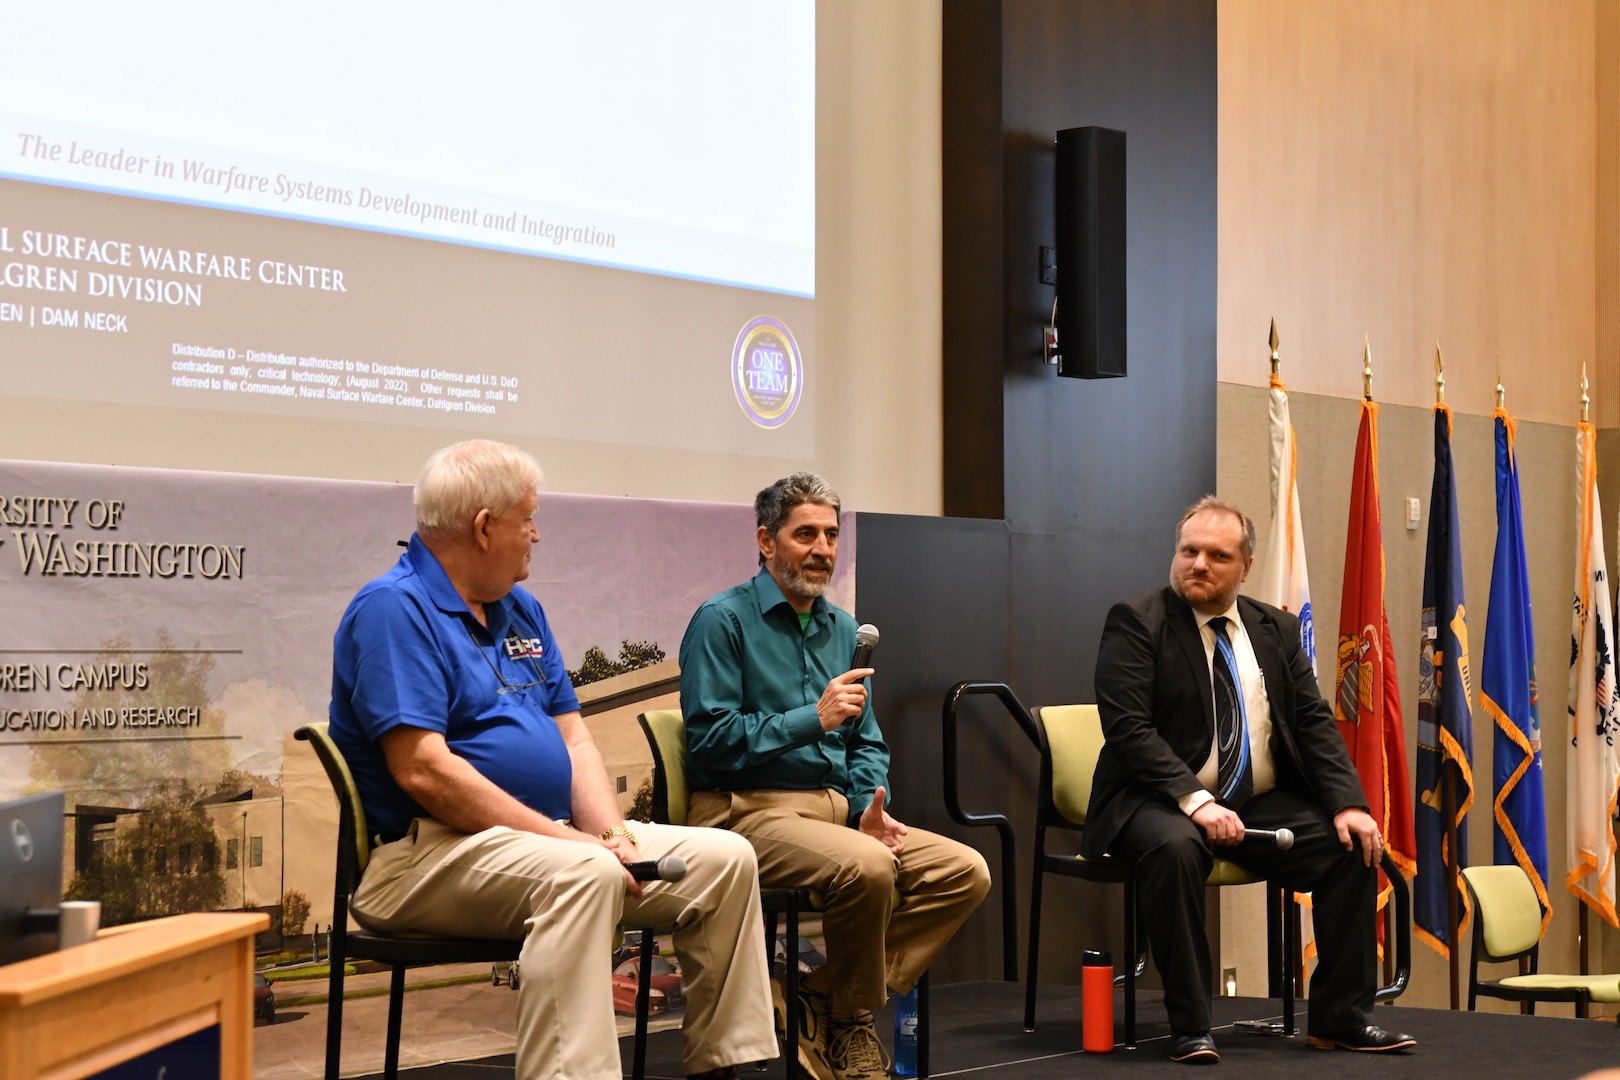 IMAGE: Panelists (left to right) Scott Sundt, Walter Roscello and Leroy Mrozowski discussed digital transformation at the Naval Surface Warfare Center Dahlgren Division Modeling and Simulation (M&S) Community of Interest M&S Summit July 26 at the University of Mary Washington’s Dahlgren Campus.